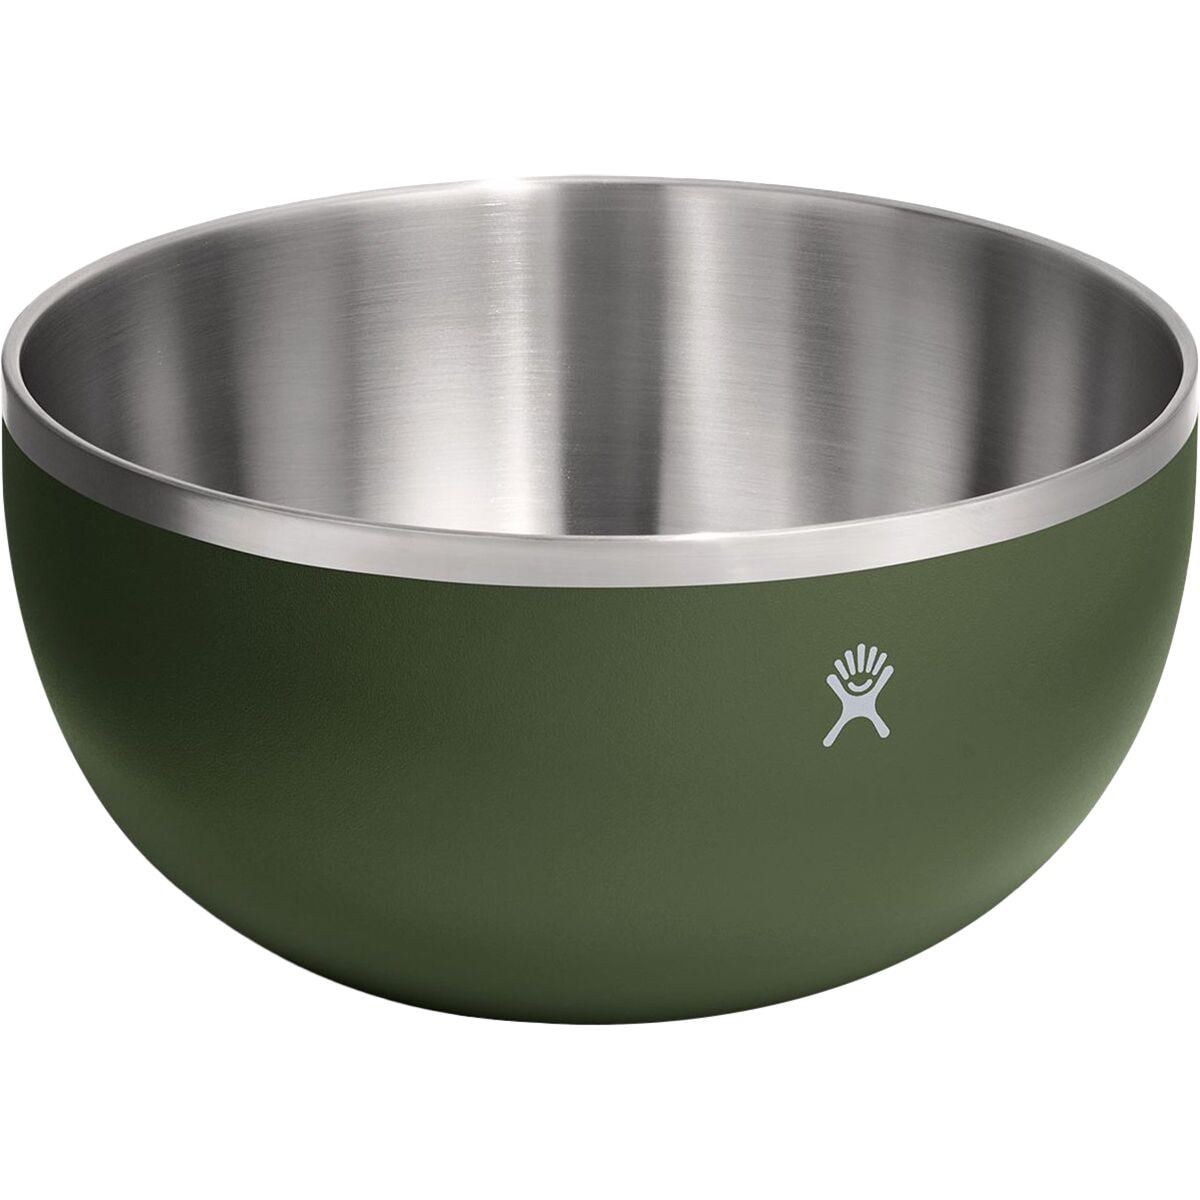 Hydro Flask Outdoor Kitchen 3qt Serving Bowl with Lid #HeyLetsGo 